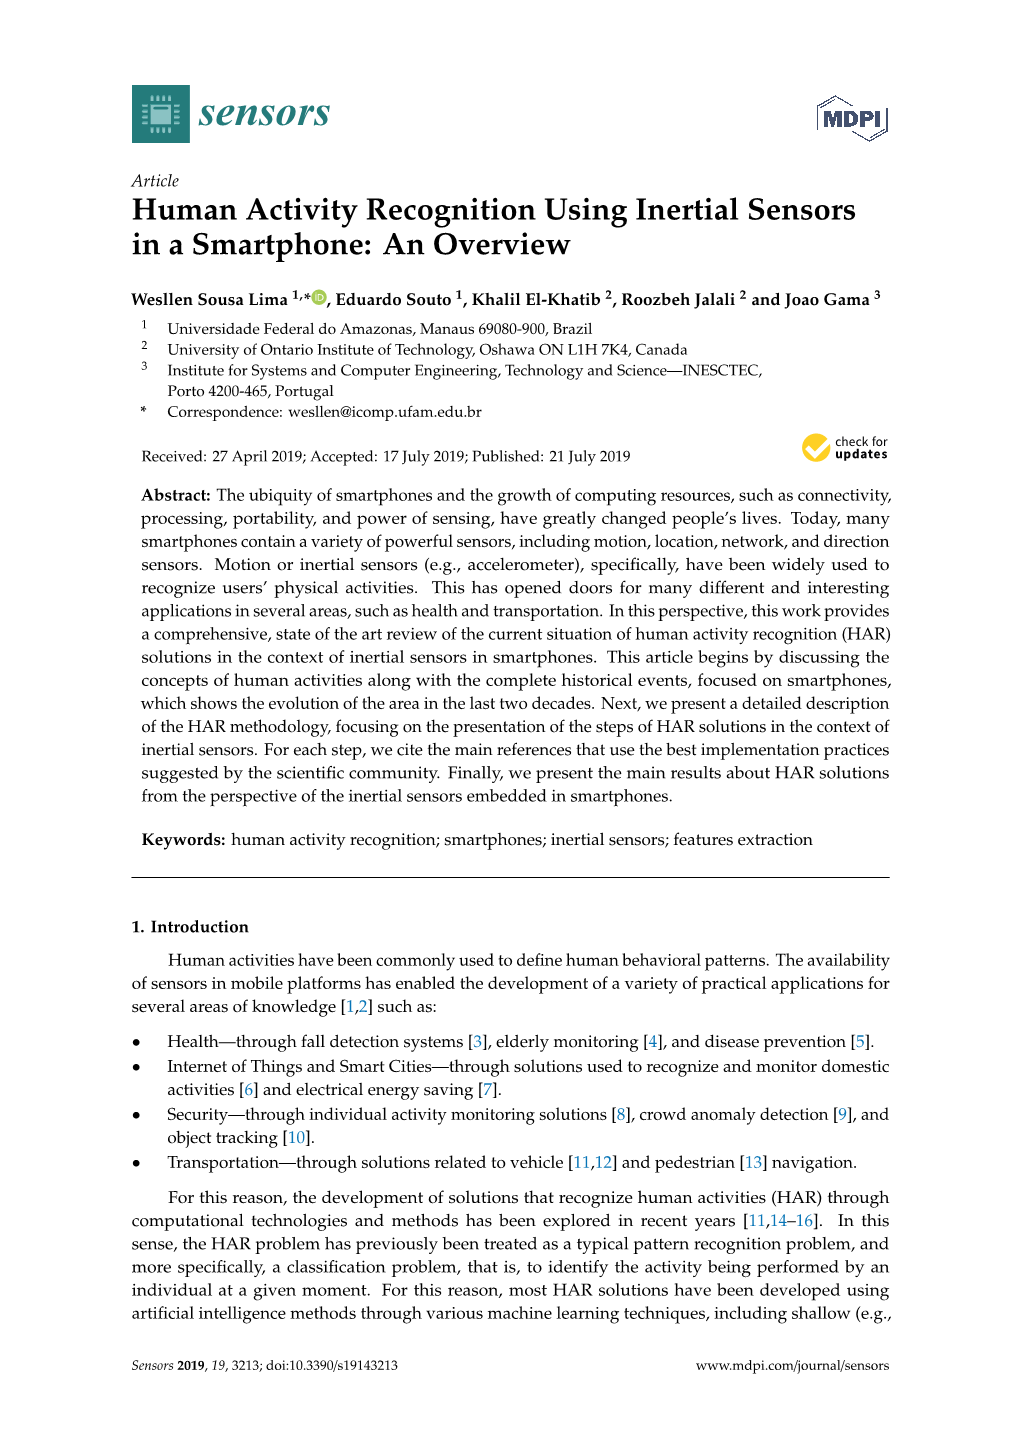 Human Activity Recognition Using Inertial Sensors in a Smartphone: an Overview